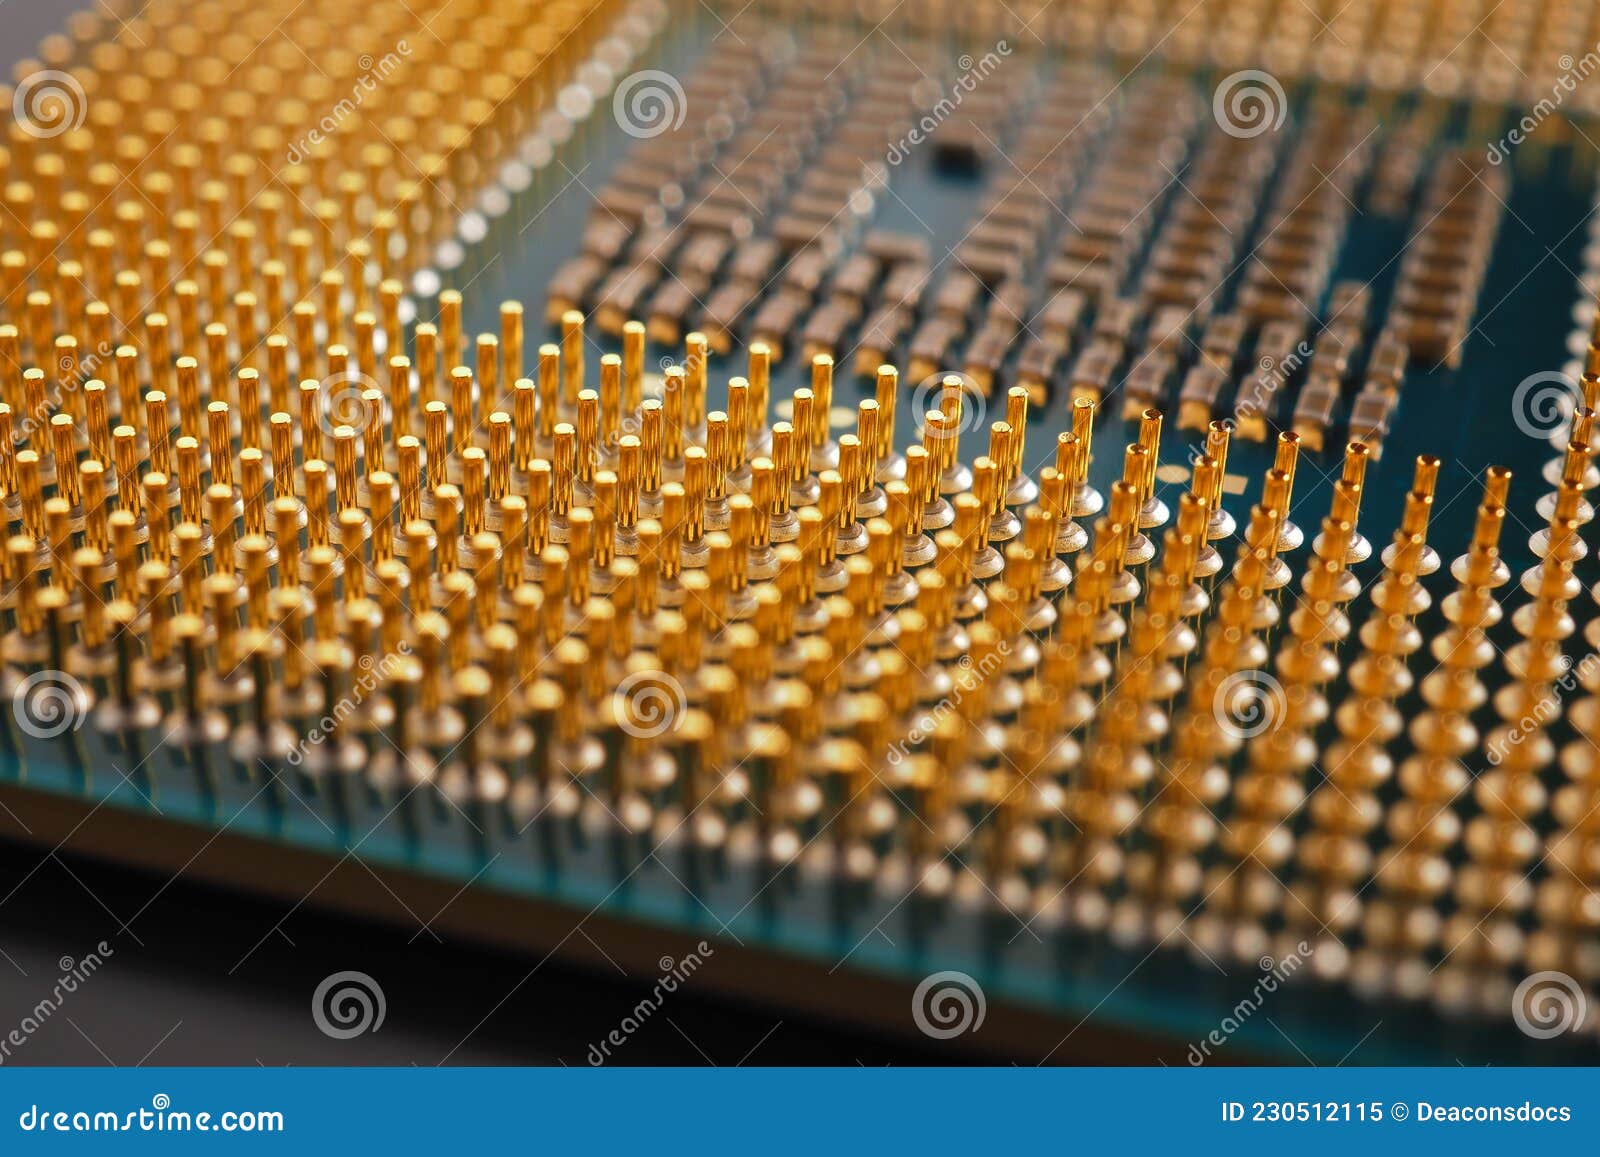 Microprocessor Stock Photo Images 28268 Microprocessor royalty free  pictures and photos available to download from thousands of stock  photographers